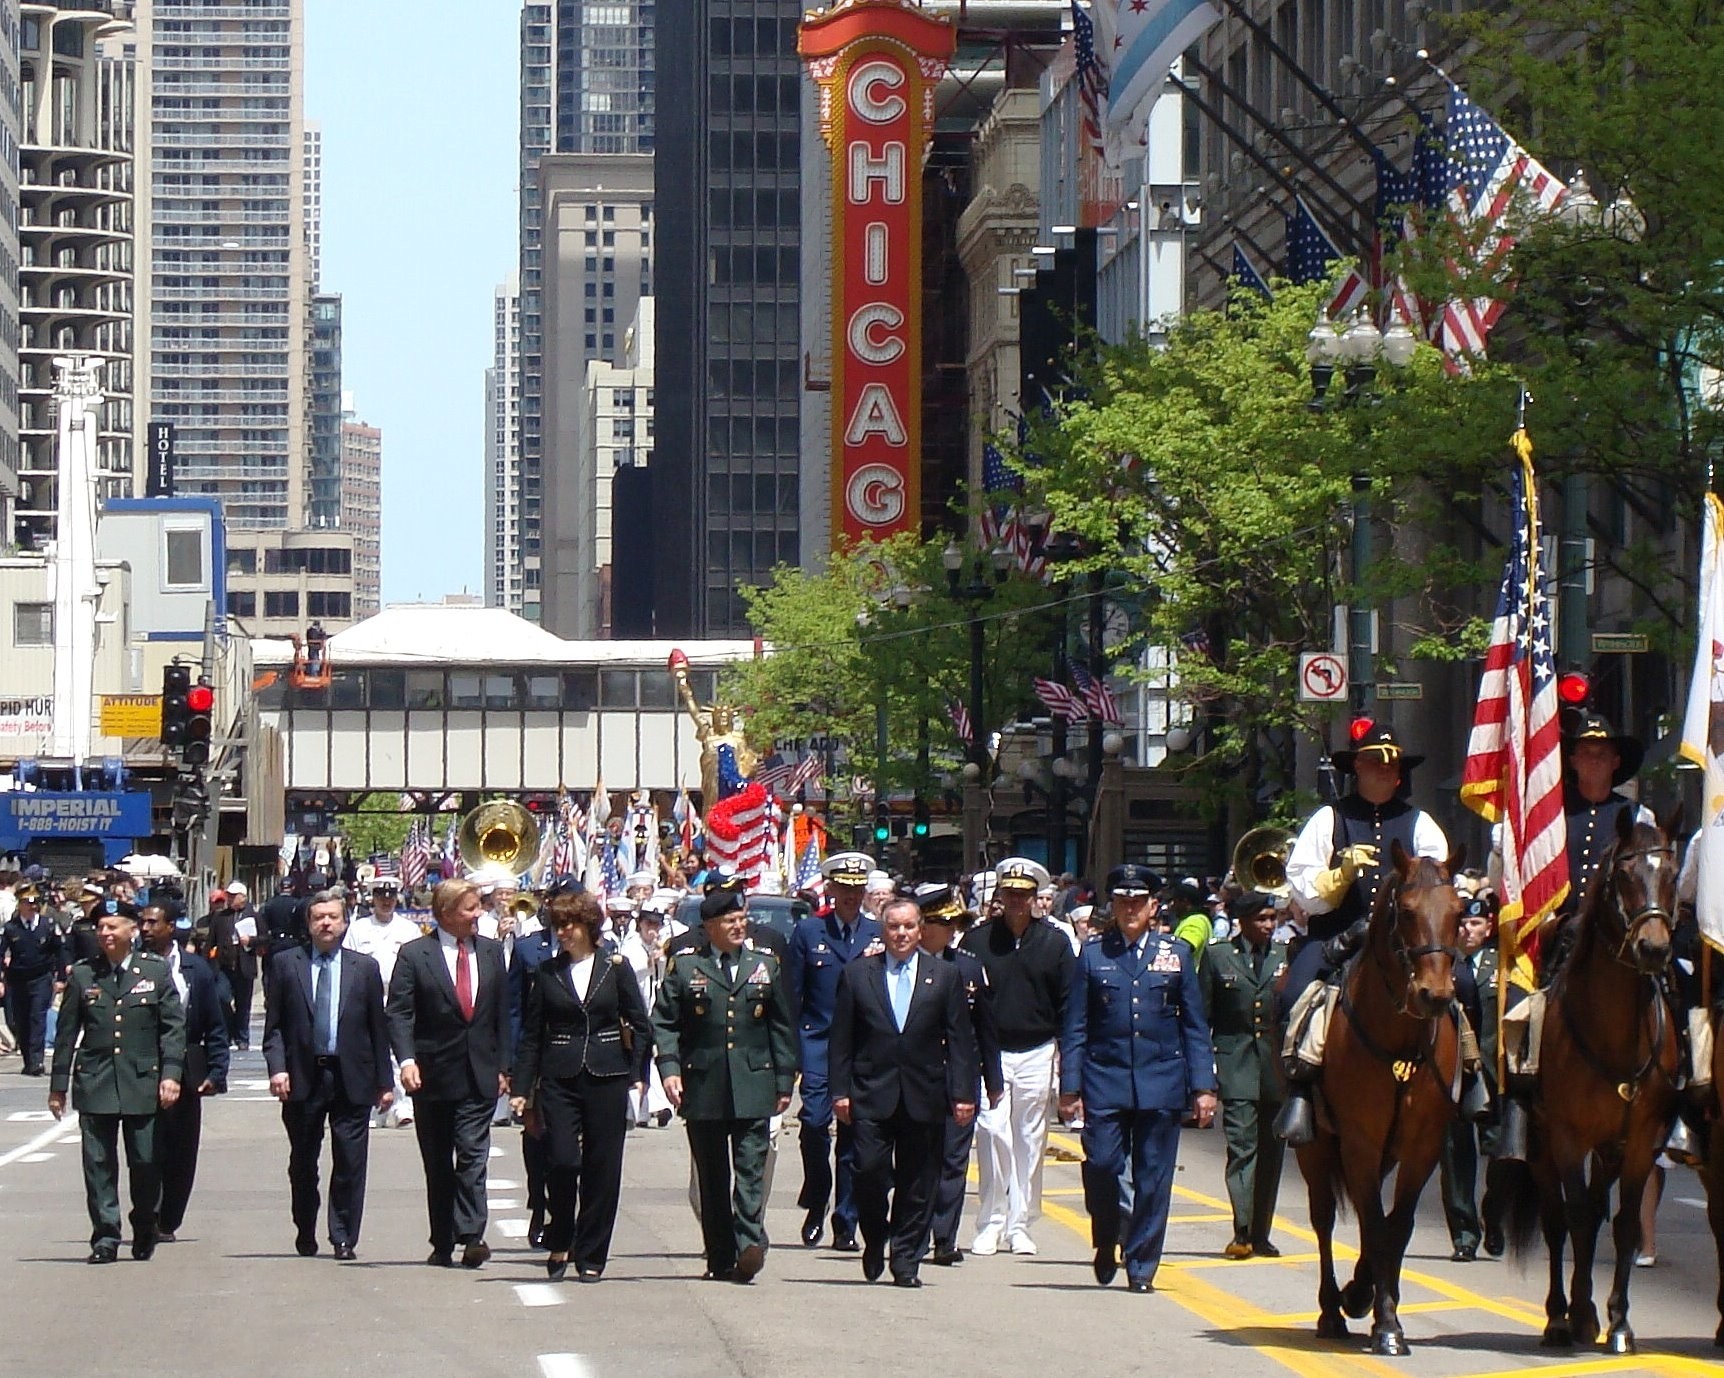 Memorial Day Observance and Parade in Chicago Article The United